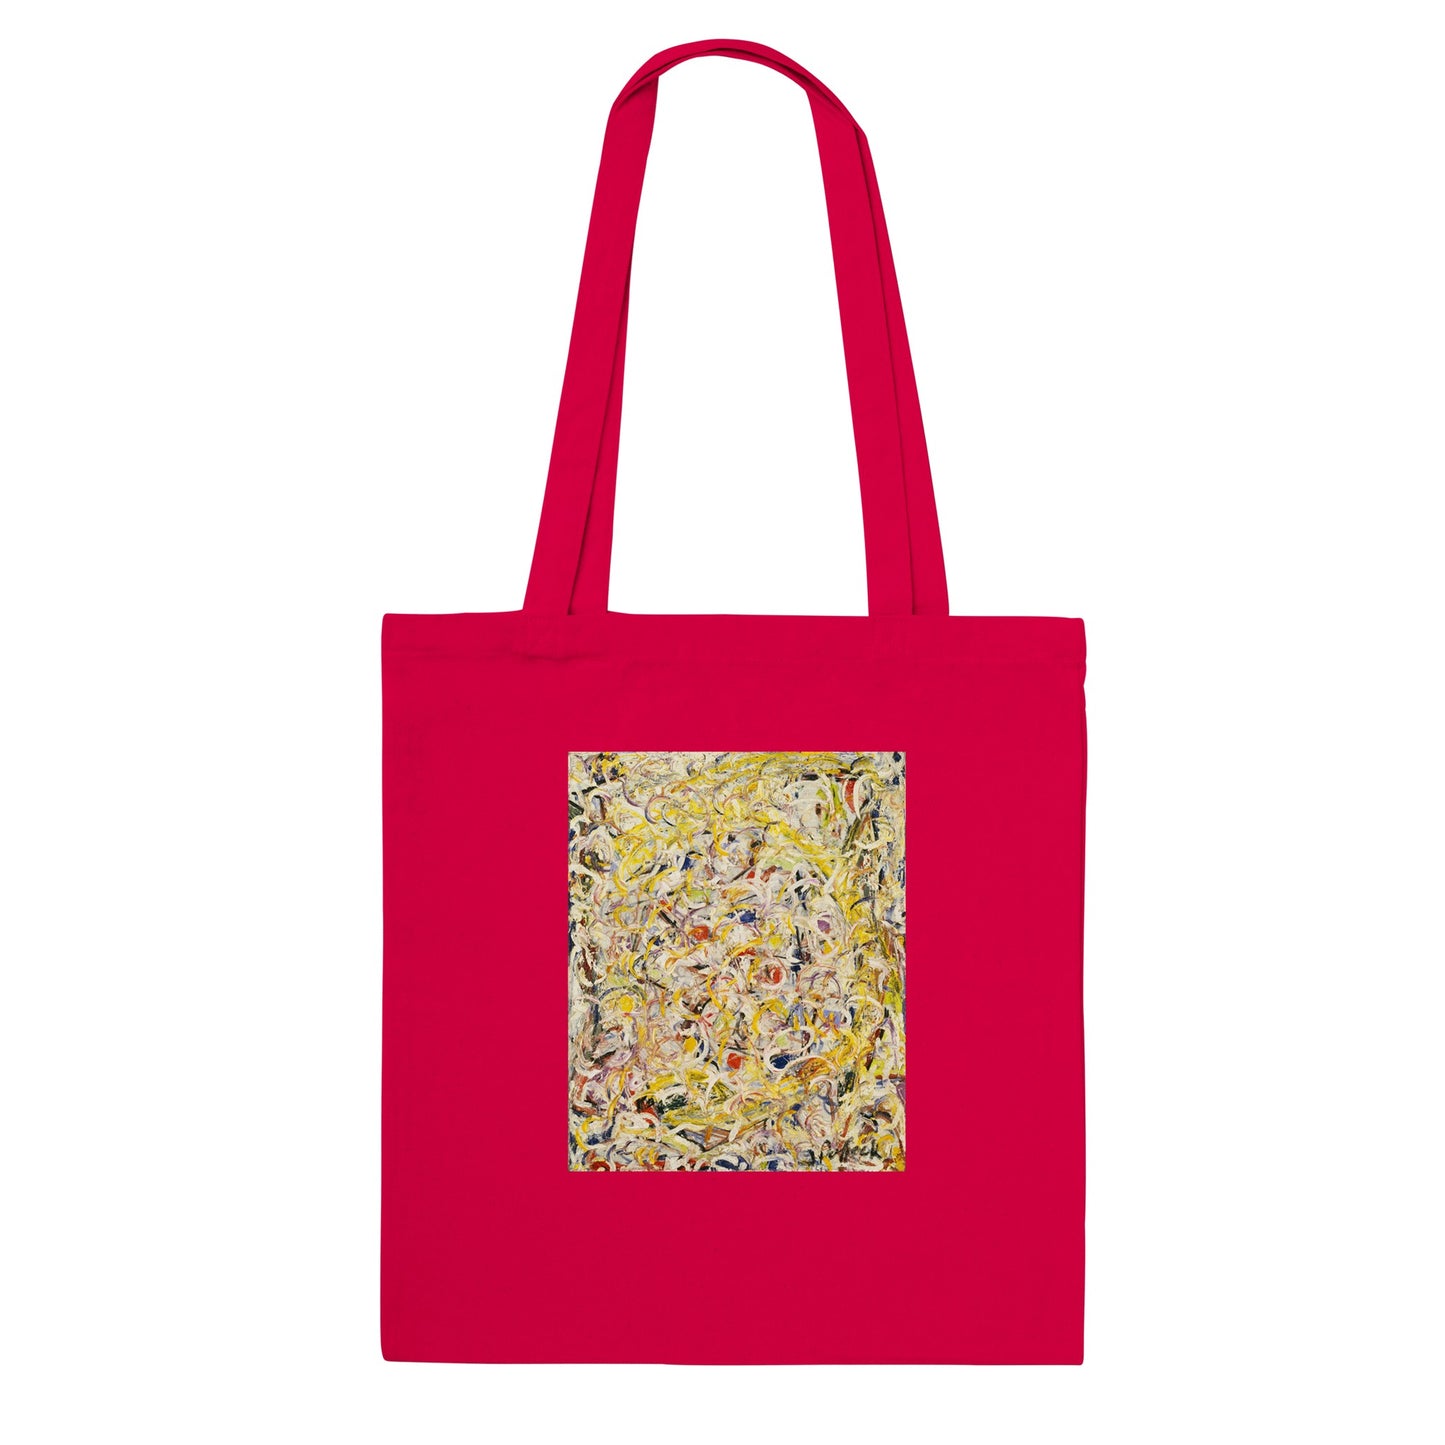 JACKSON POLLOCK - SHIMMERING SUBSTANCE - CLASSIC TOTE BAG